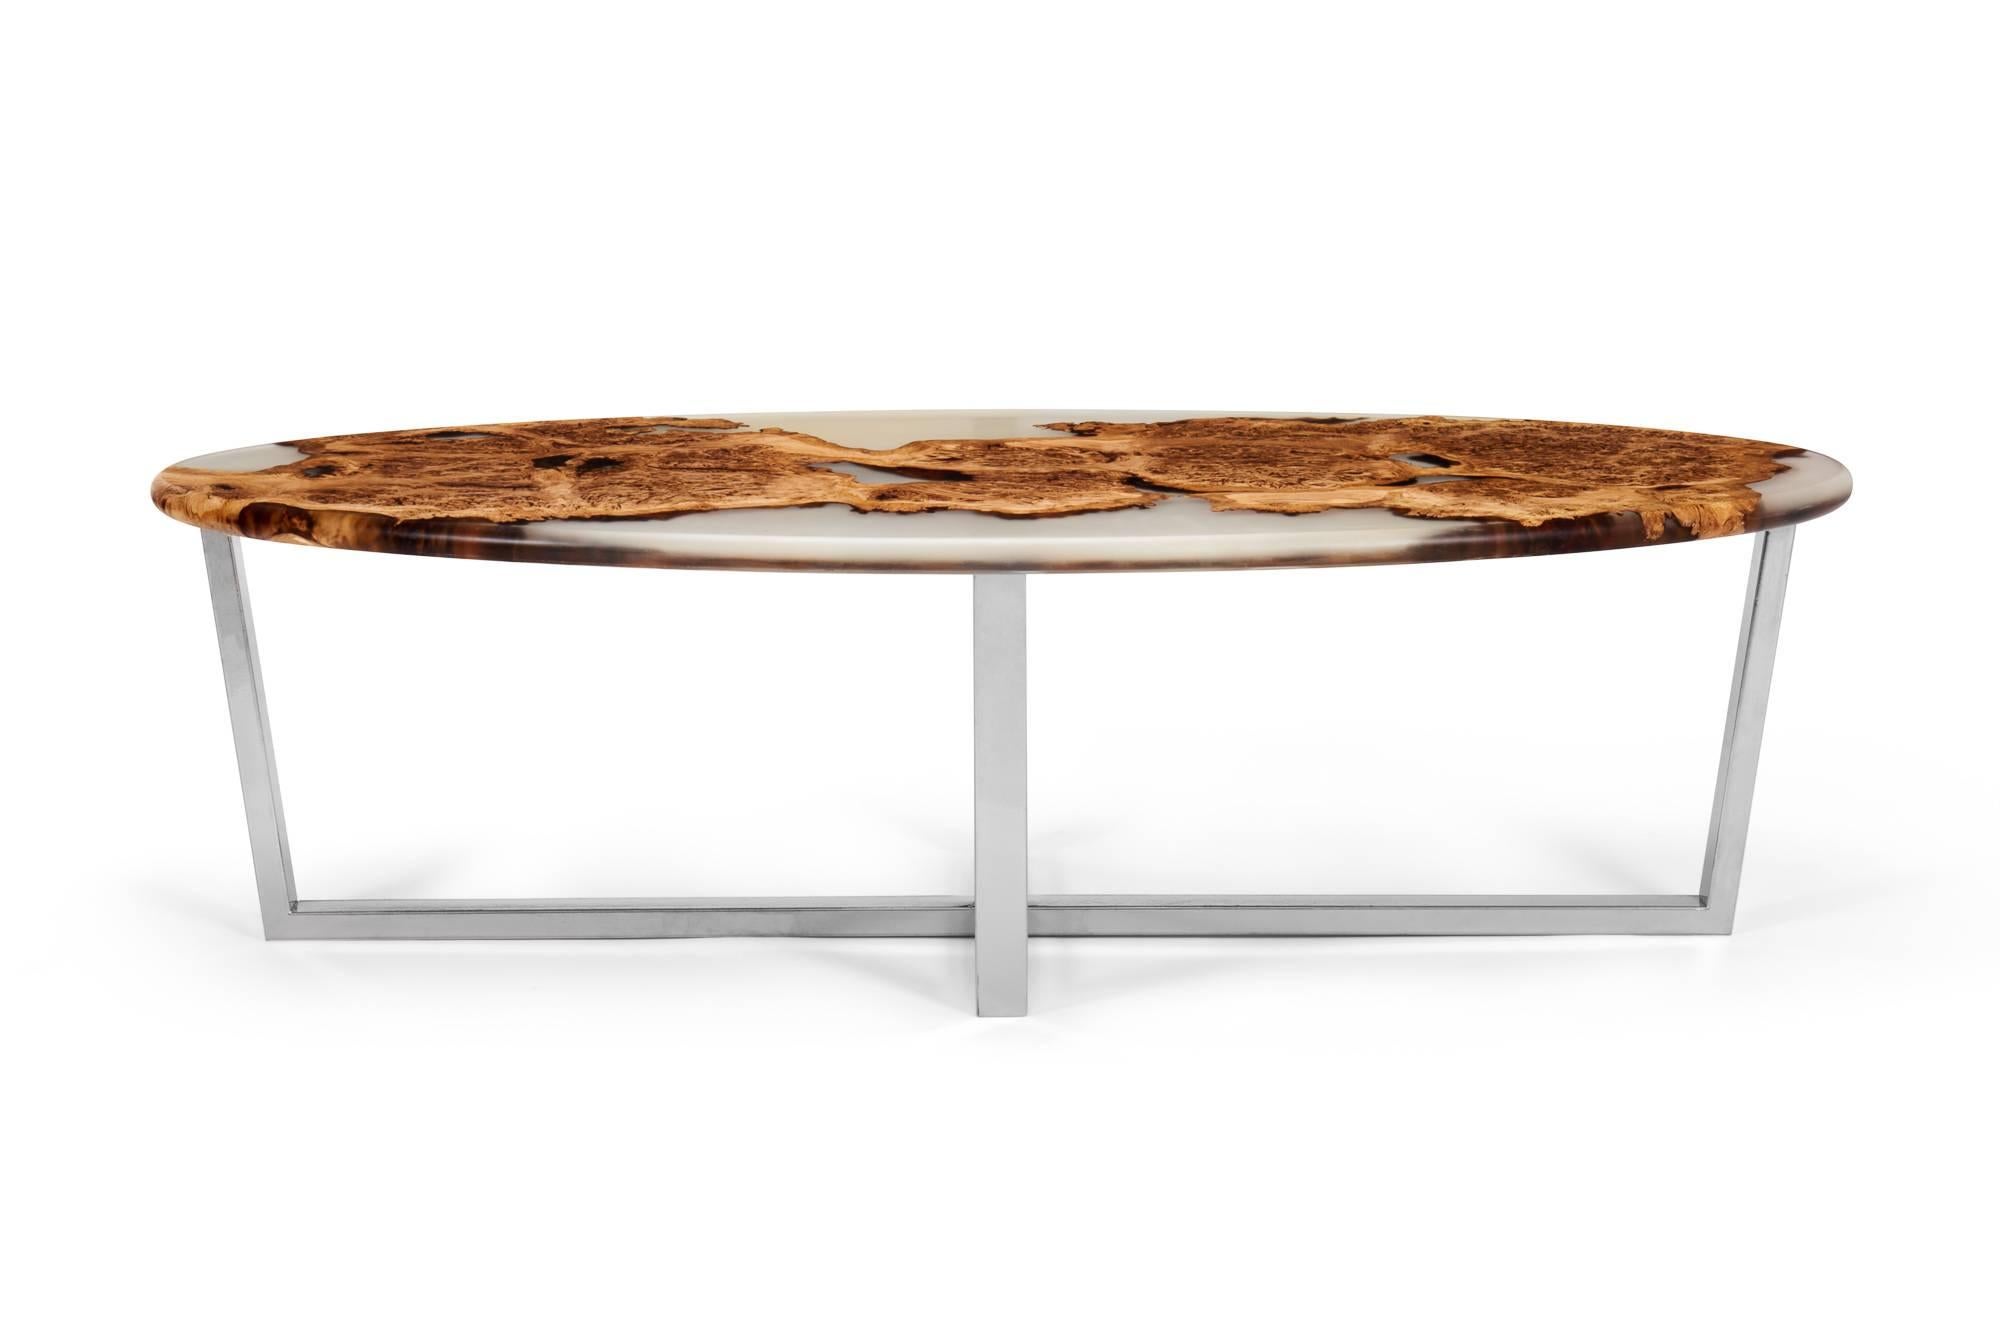 Beautiful oval coffee table made from English oak burr with rounded edge detail. The wood has been cast in clear resin to celebrate the live edges and knots in their full glory. This piece sits on a steel base with a chrome powder coated finish.